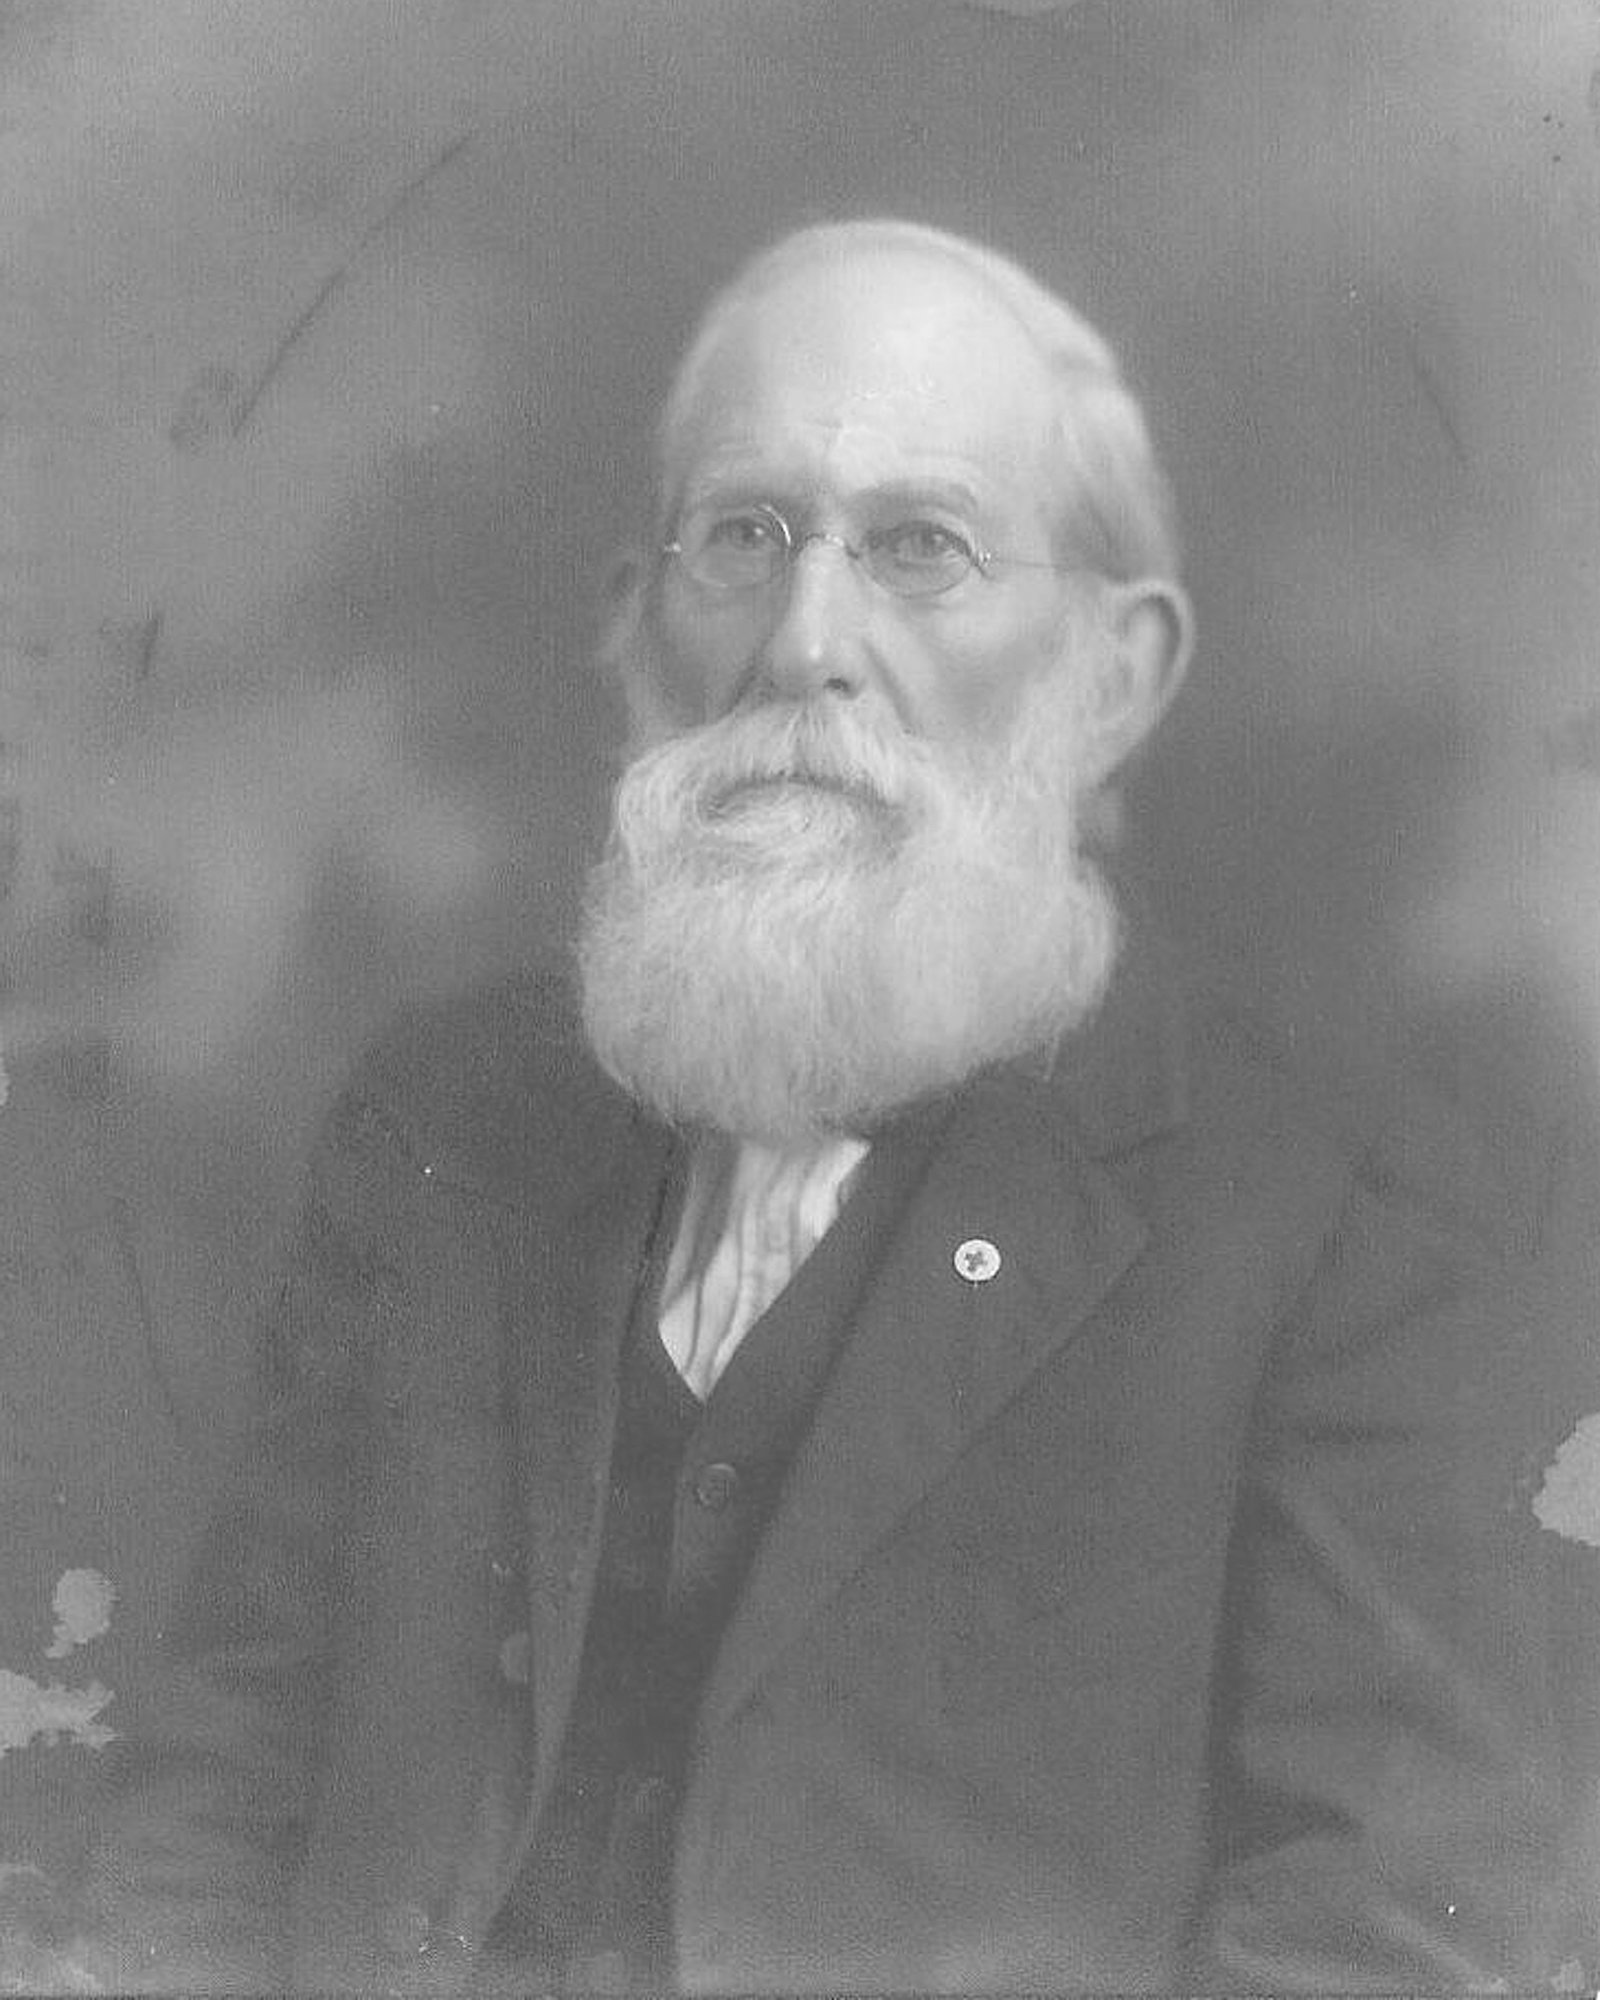 Noah Graham Osteen began work as an apprentice printer at 12 years old. He became publisher of The Watchman and Southron, and his son, Hubert Graham Osteen, founded The Sumter Item in 1894. Today marks its 125th anniversary.